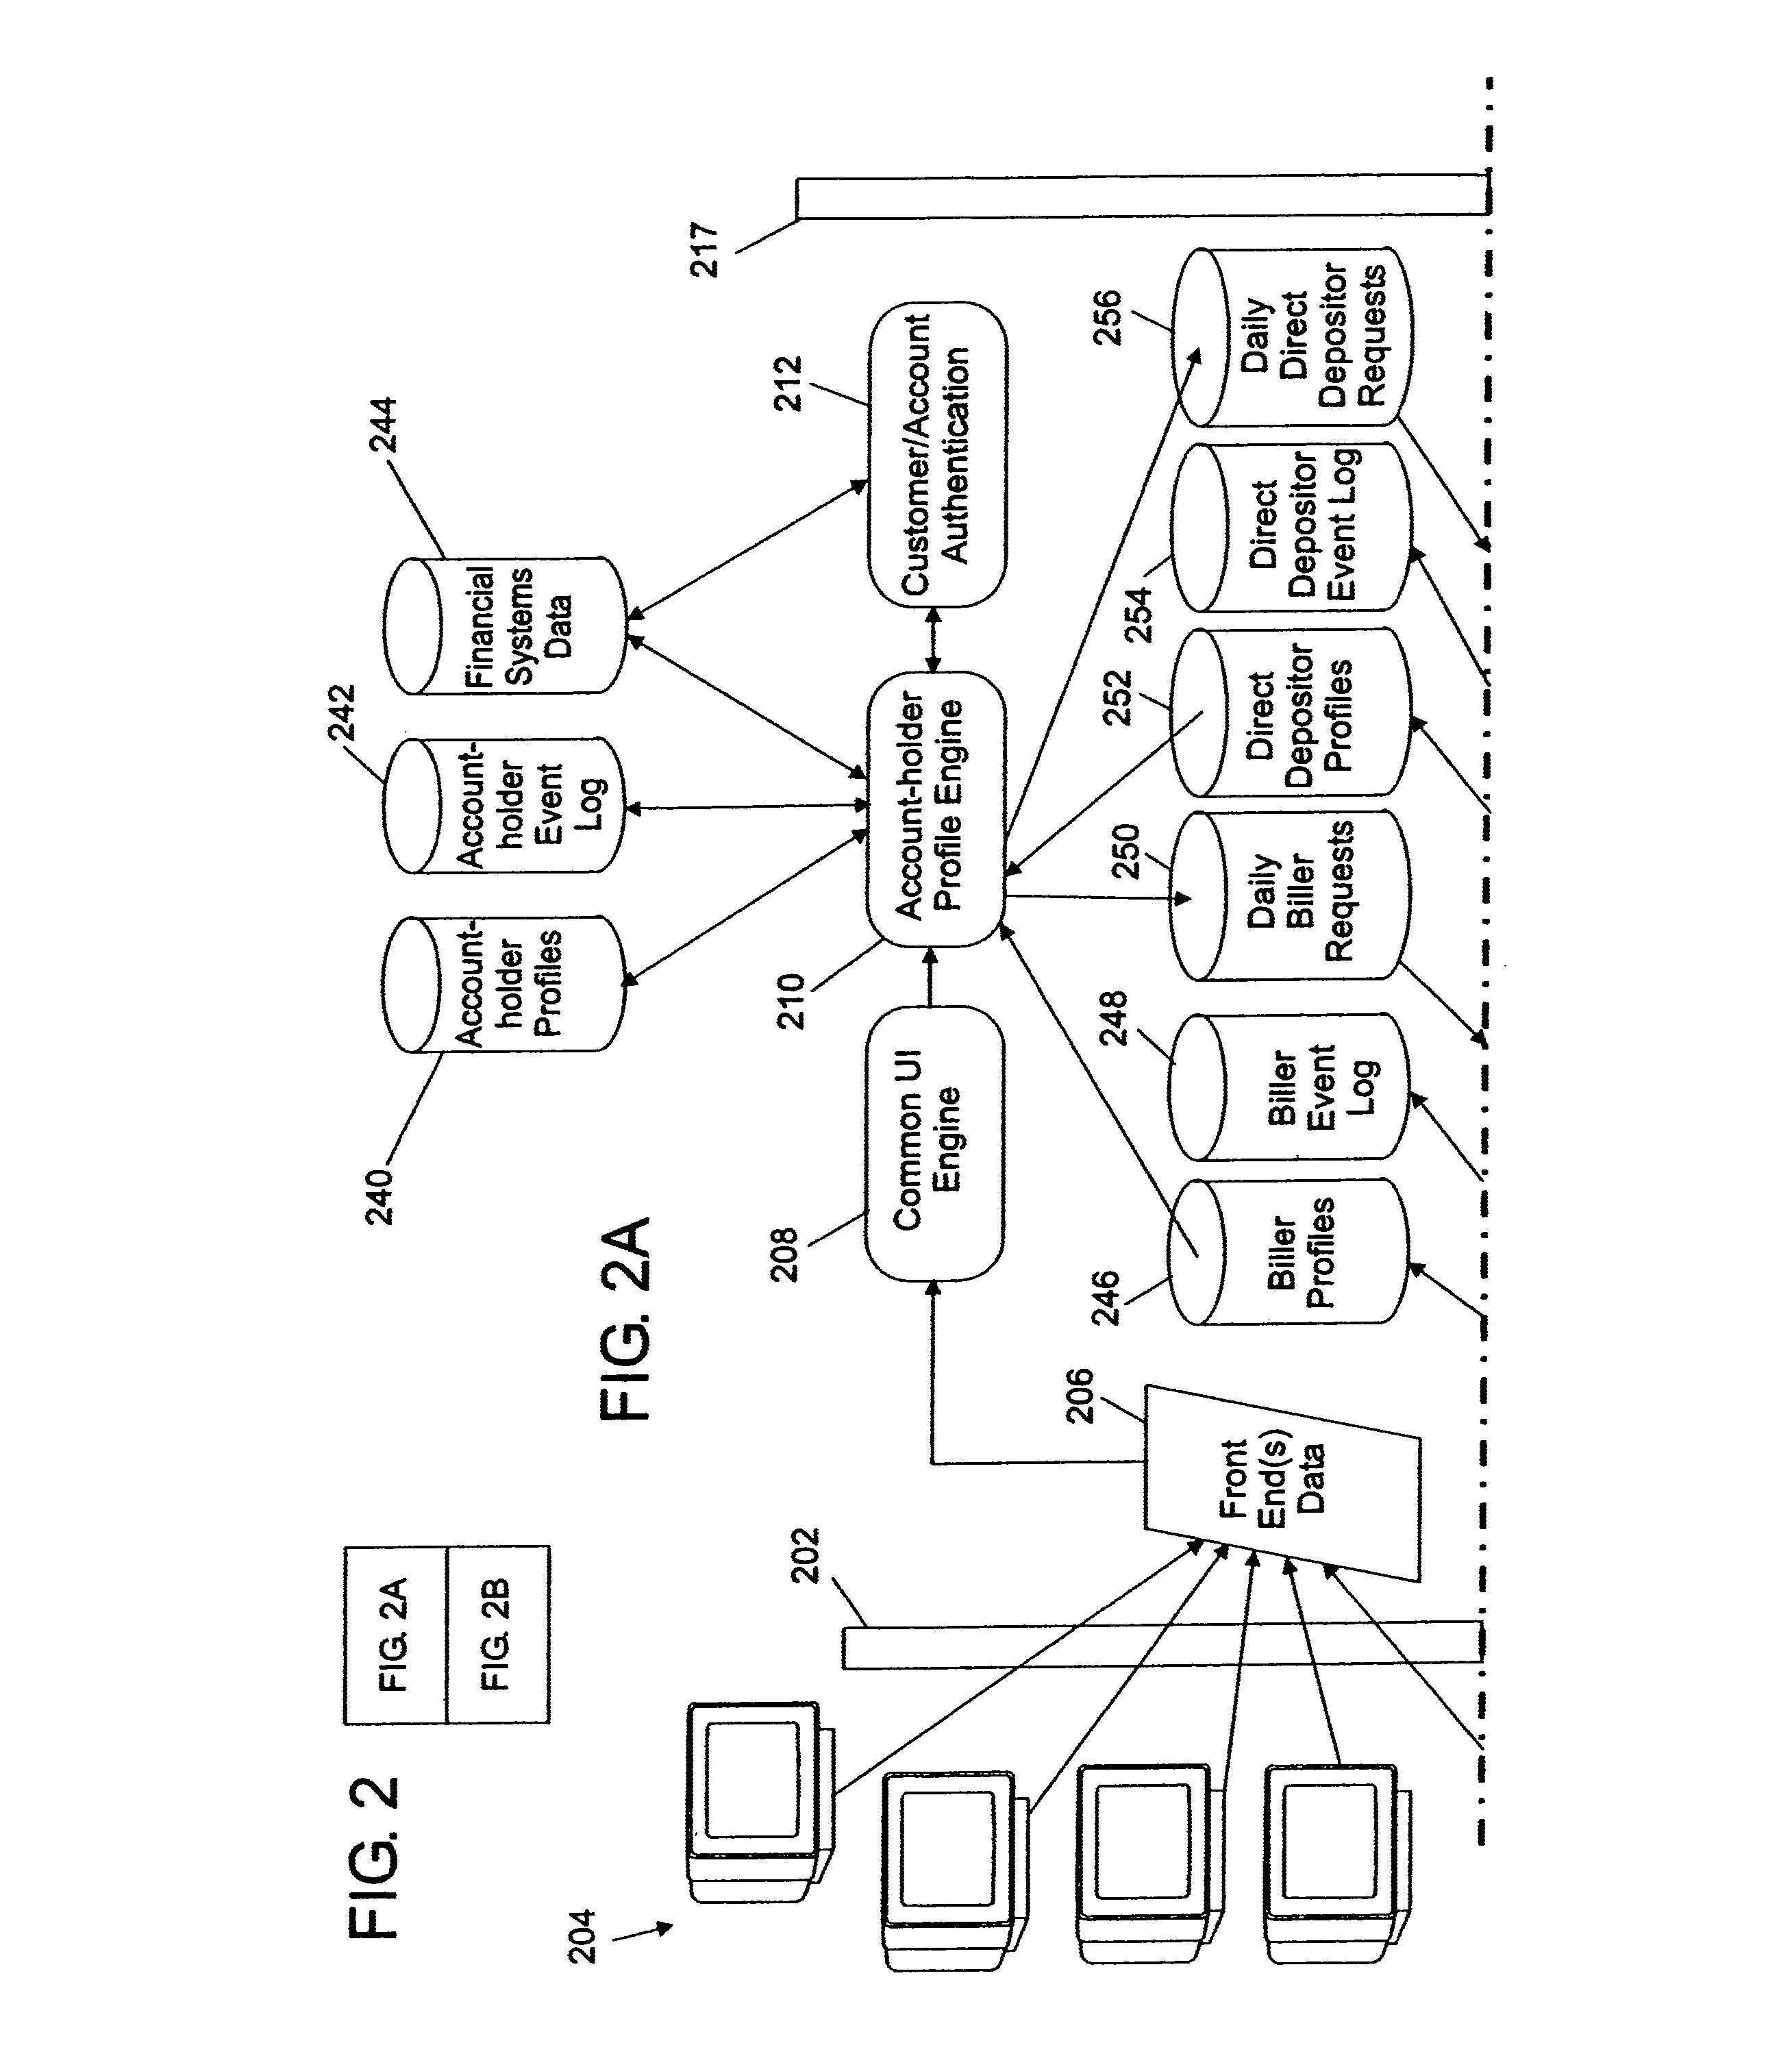 System and method for authorizing third-party transactions for an account at a financial institution on behalf of the account holder